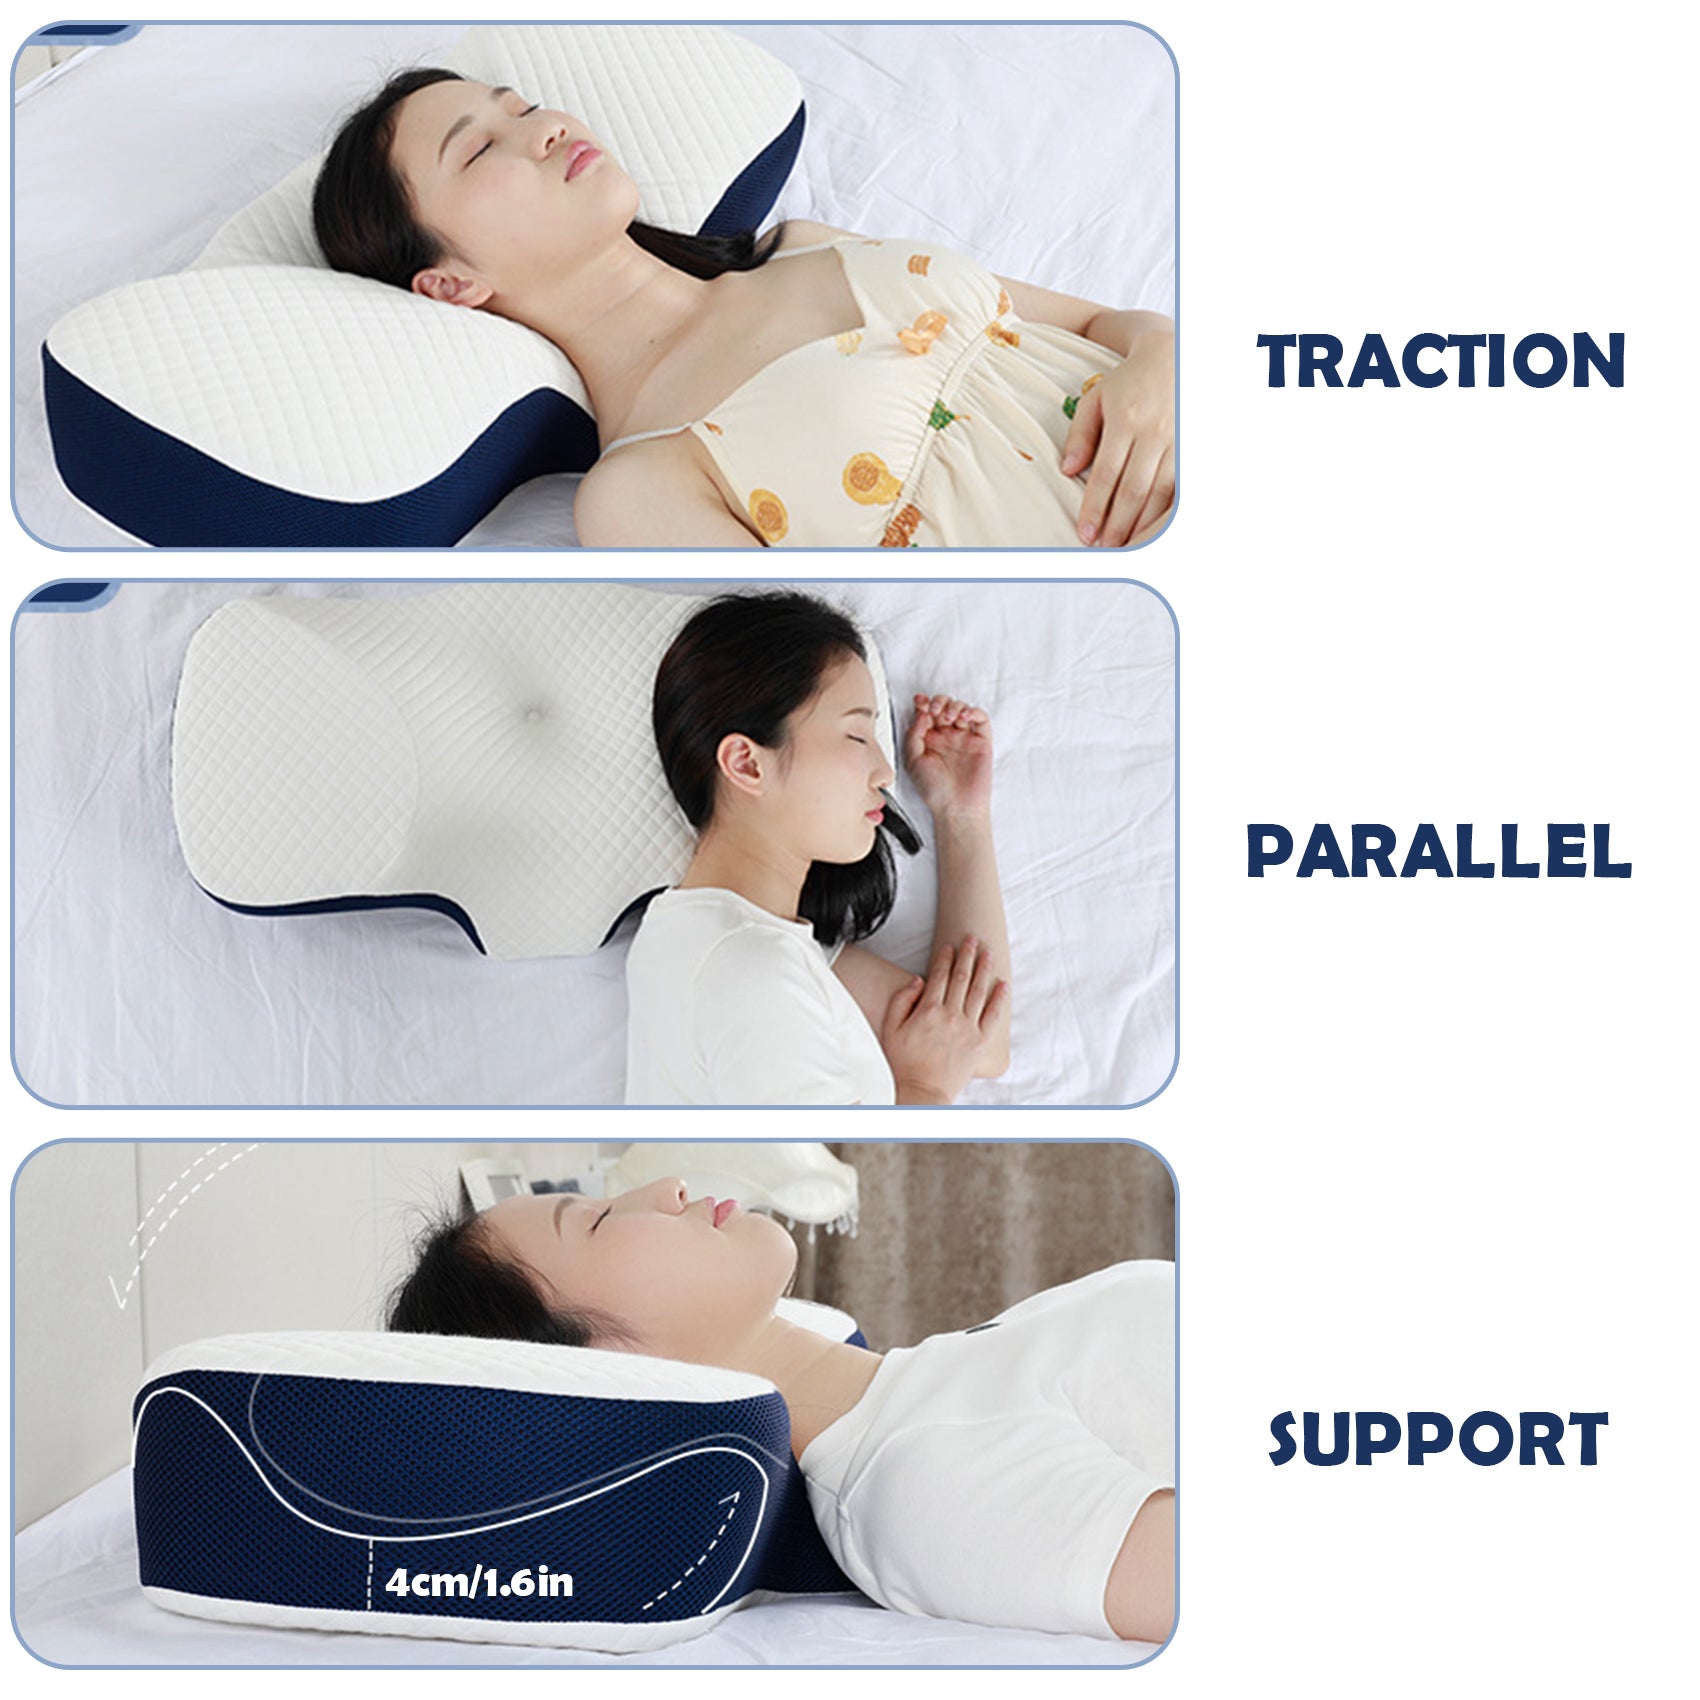 Walmeck Memory Foam Pillow with Washable Silk-Pillowcase Orthopedic Ergonomic Cervical Sleeping Pillow for Neck Shoulder Pain for Side Back Stomach Sleepers